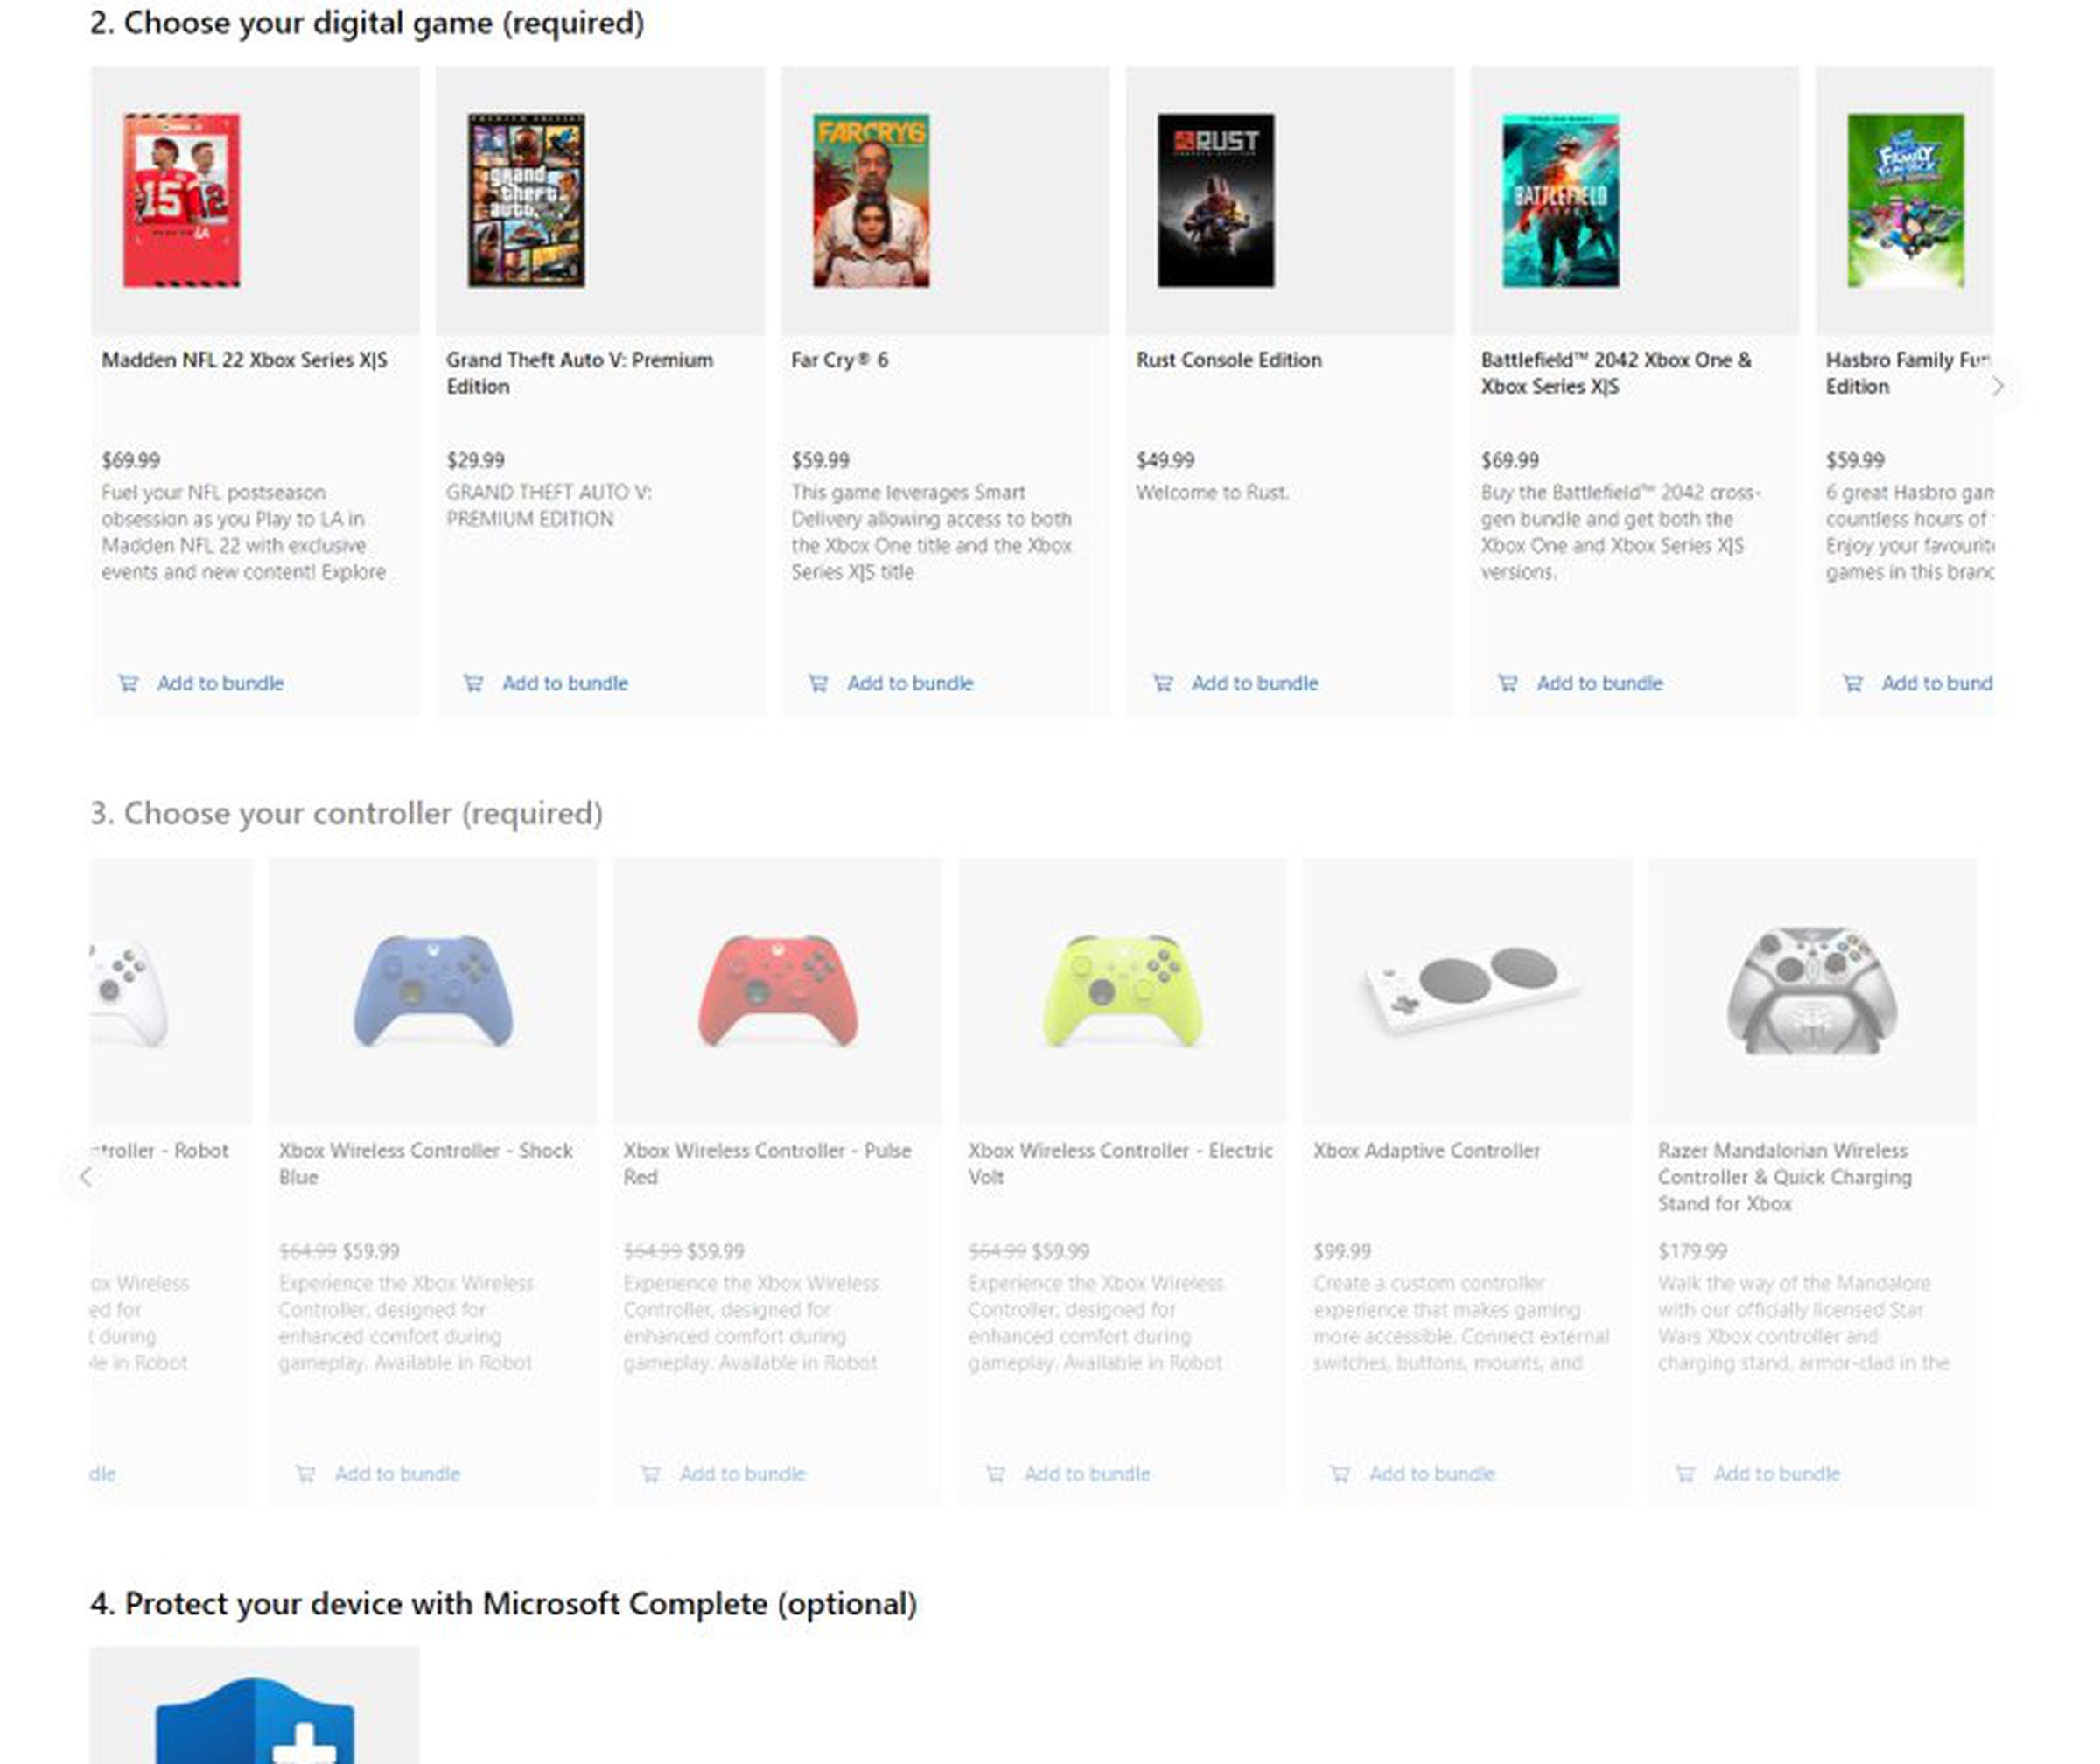 Microsoft initially required buyers pick up a game at the standard price, even though many of them are on sale. It has since updated bundle pricing to match the lowest available prices.